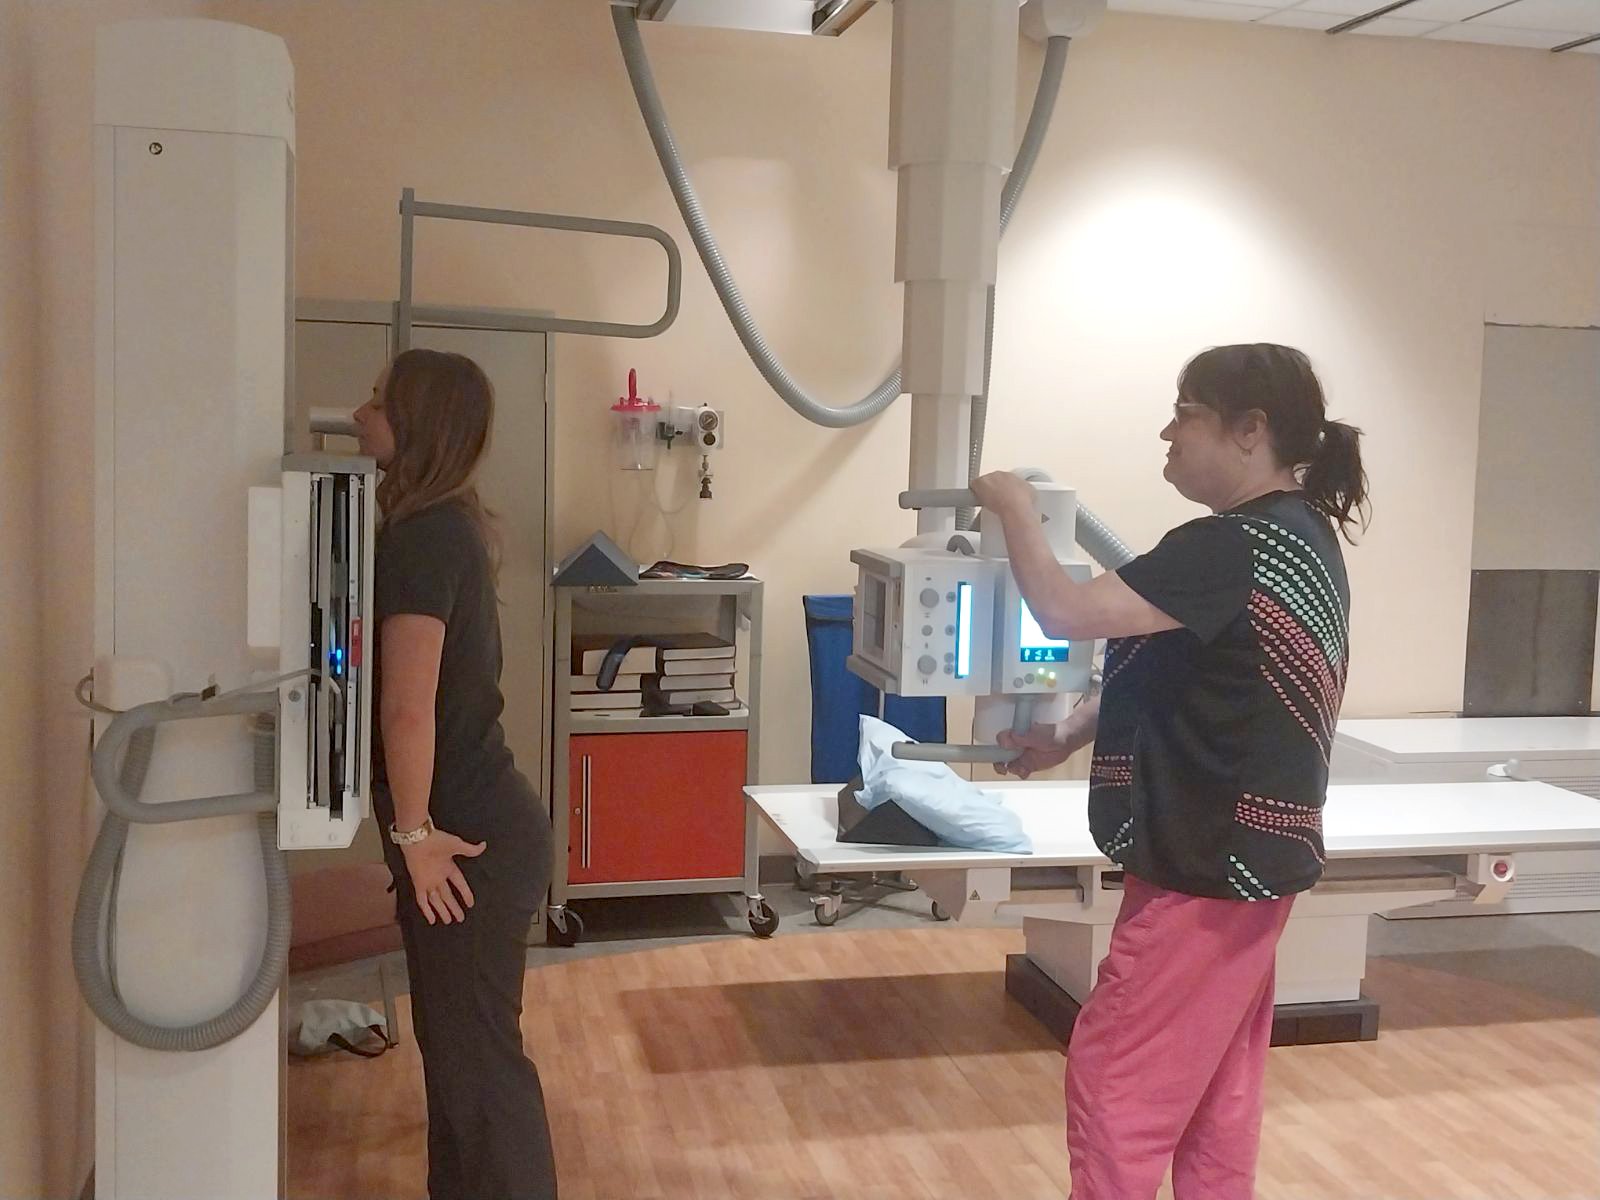 Massac Memorial employees with the FDR D-EVO Suite II X-ray room.